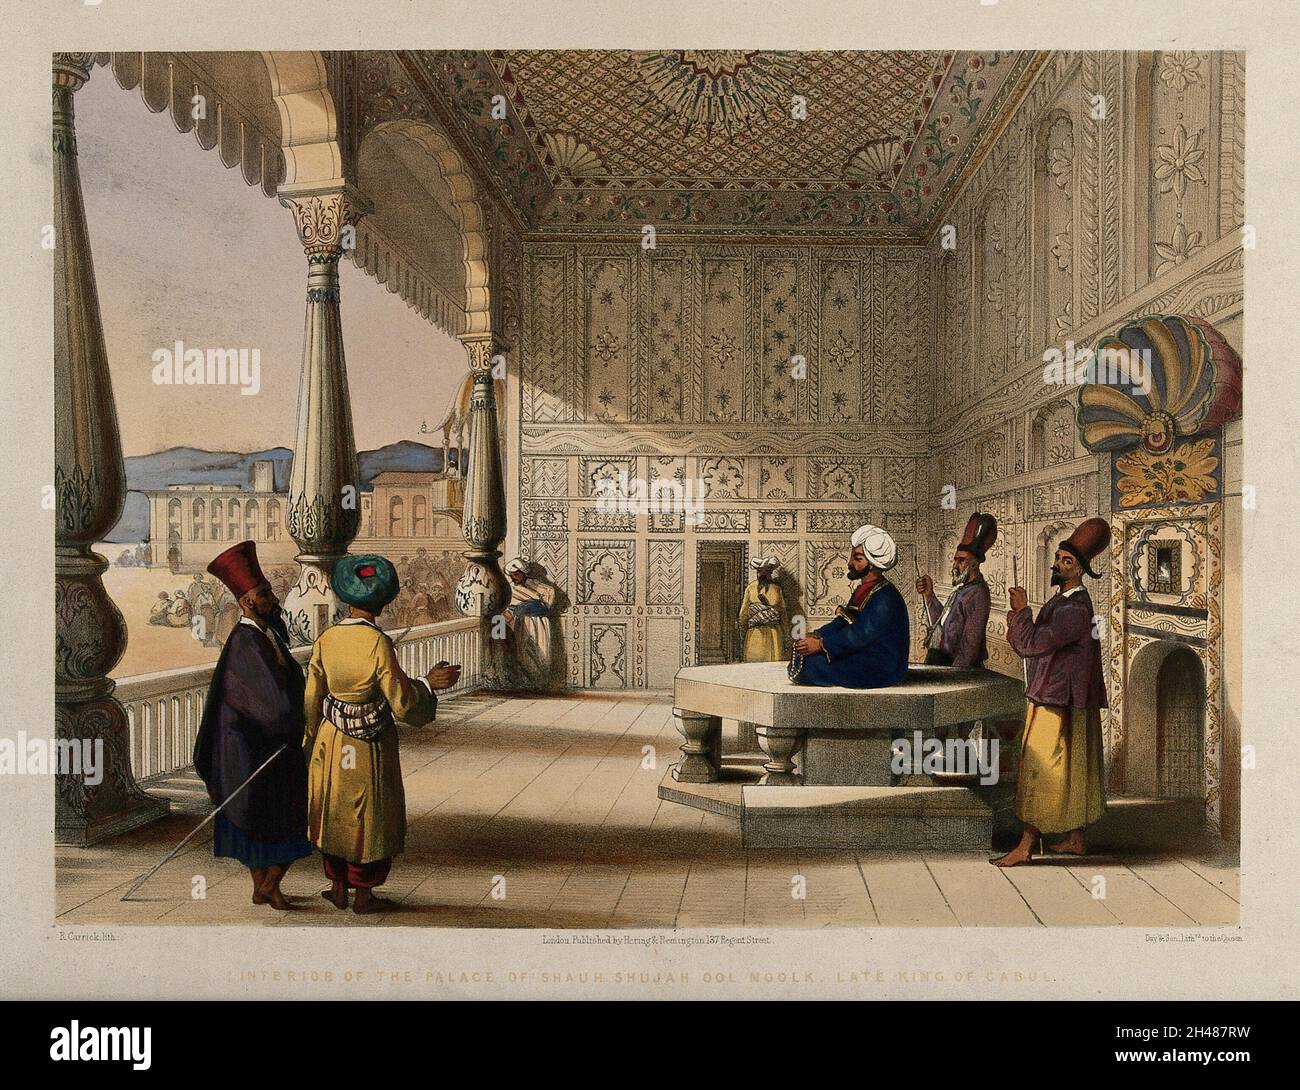 Men in the decorated palace of Shah Shujah Ool Moolk, Afghanistan. Coloured lithograph by R. Carrick after Lieutenant James Rattray, c. 1847. Stock Photo